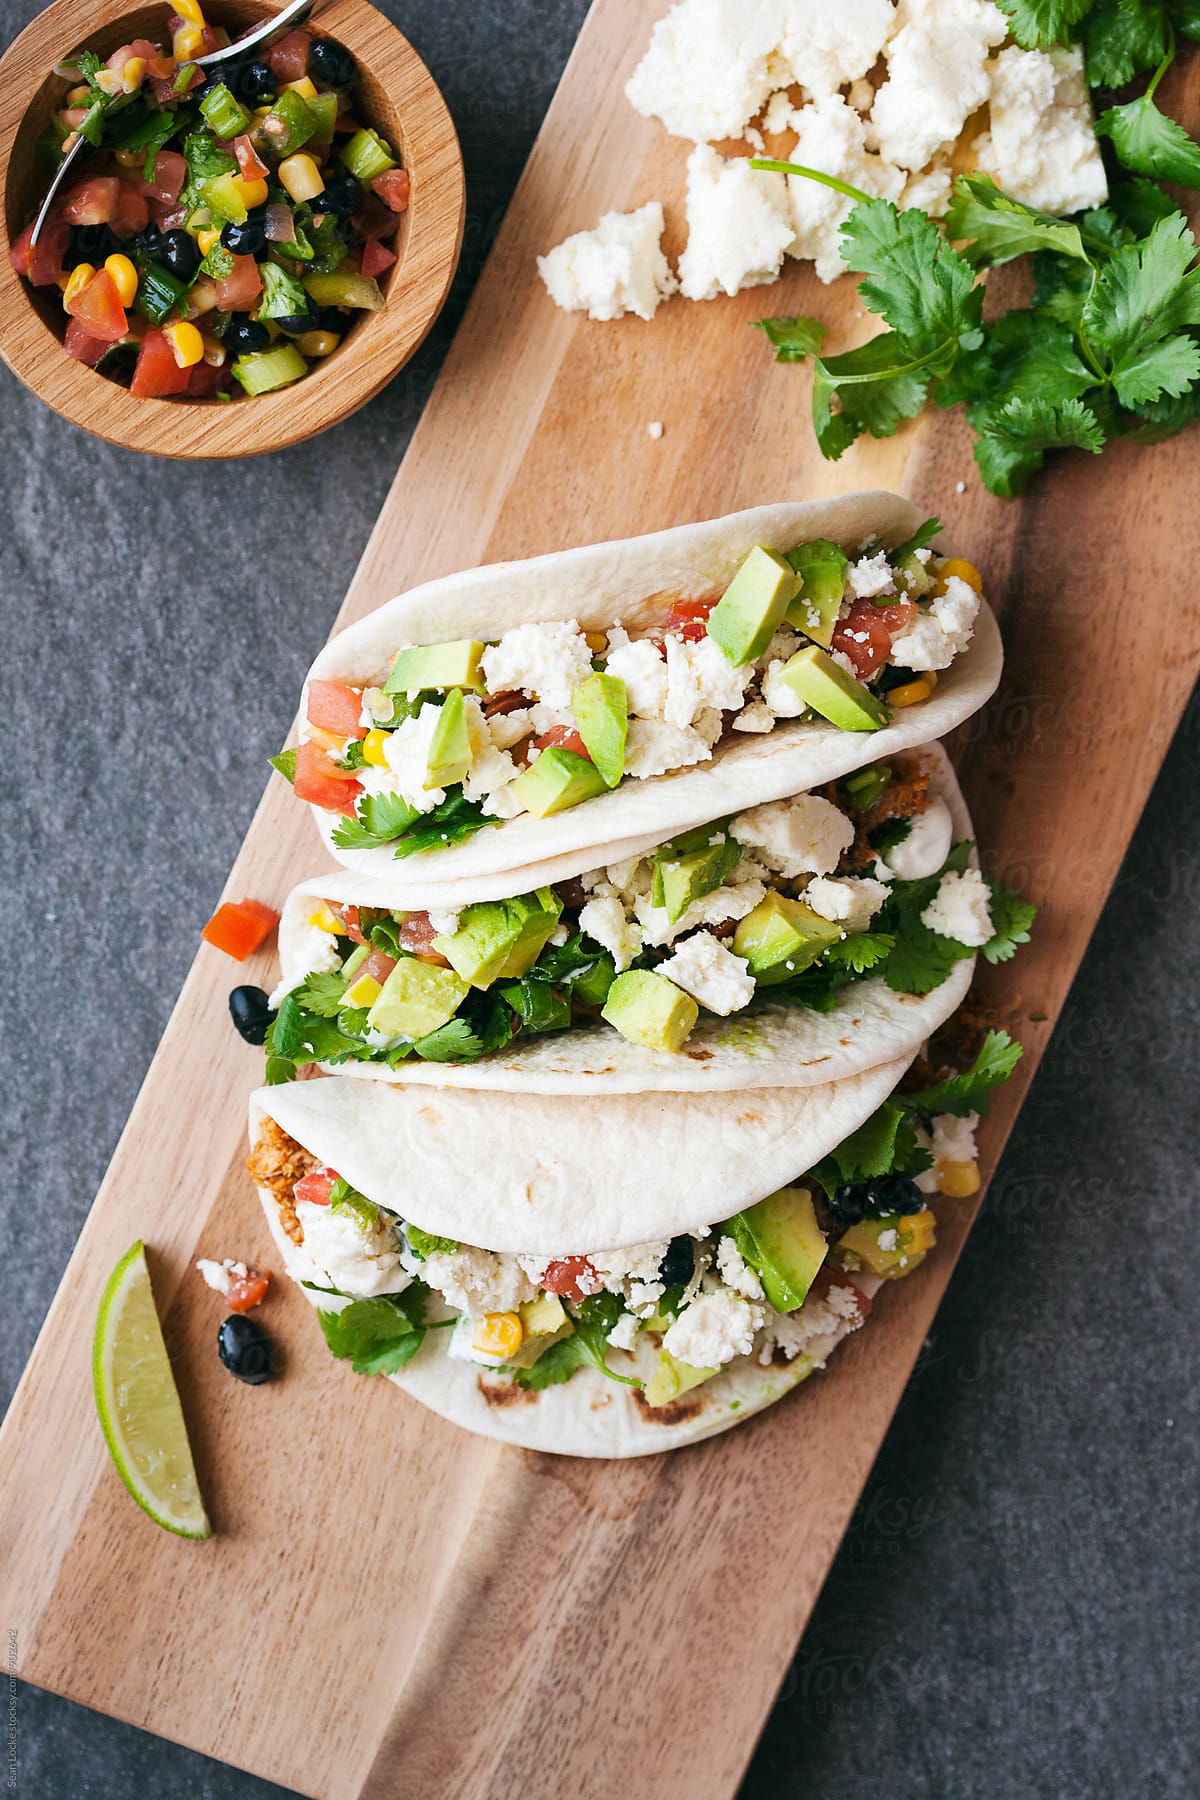 Tacos: Cutting Board With Three Chicken Soft Tacos